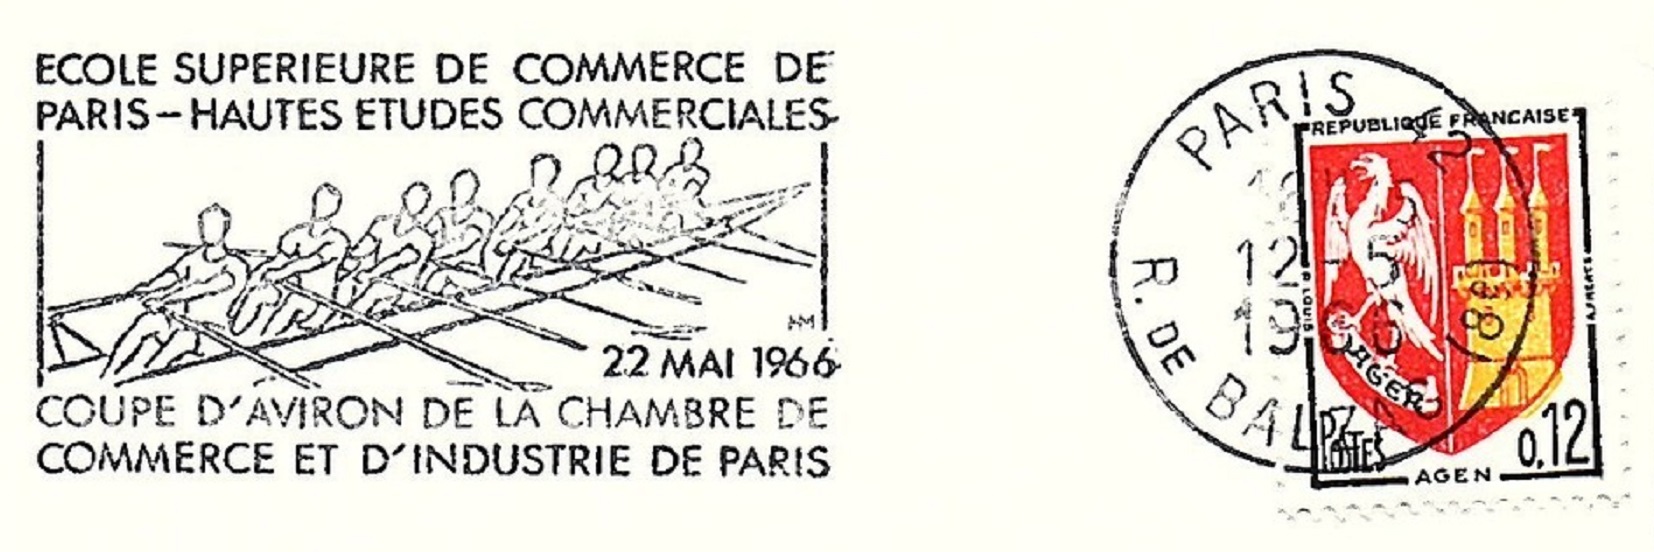 PM FRA 1966 May 12th Paris Coup dAviron Chambre Commerce et Industrie Paris May 22nd